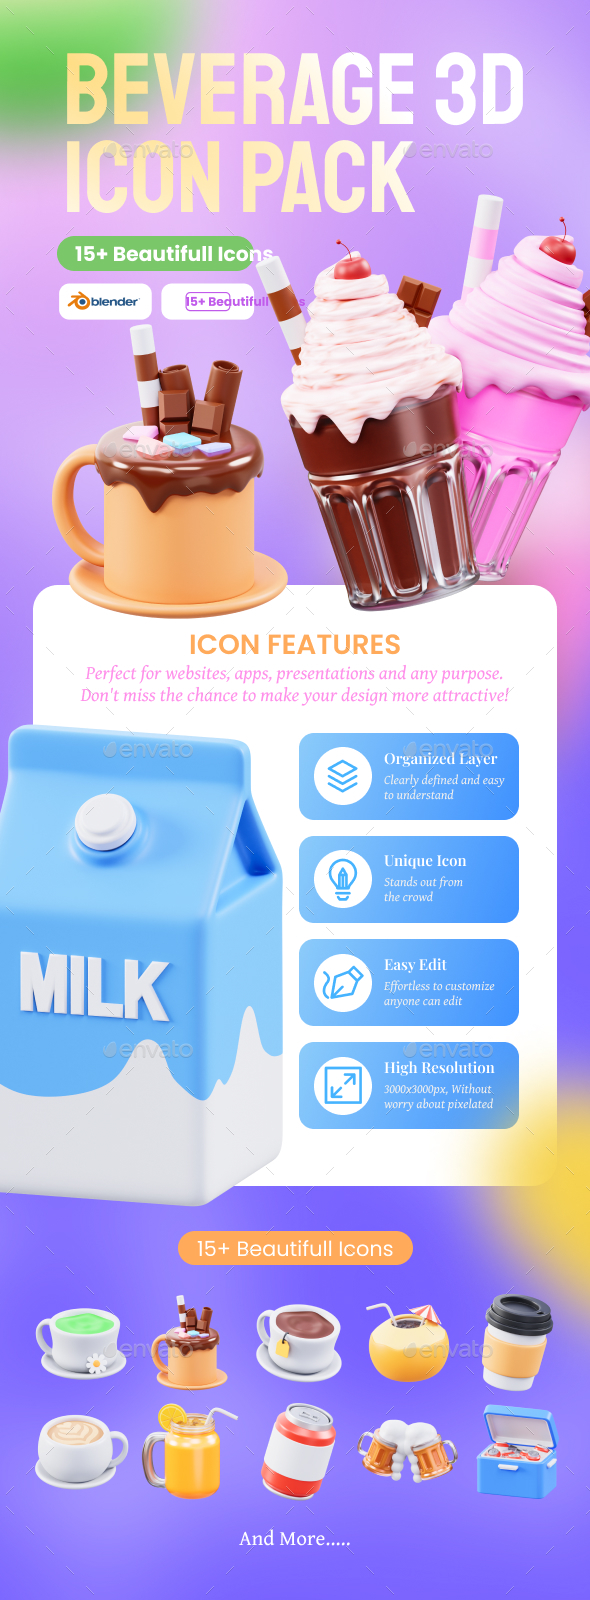 Beverage 3D Icon Pack